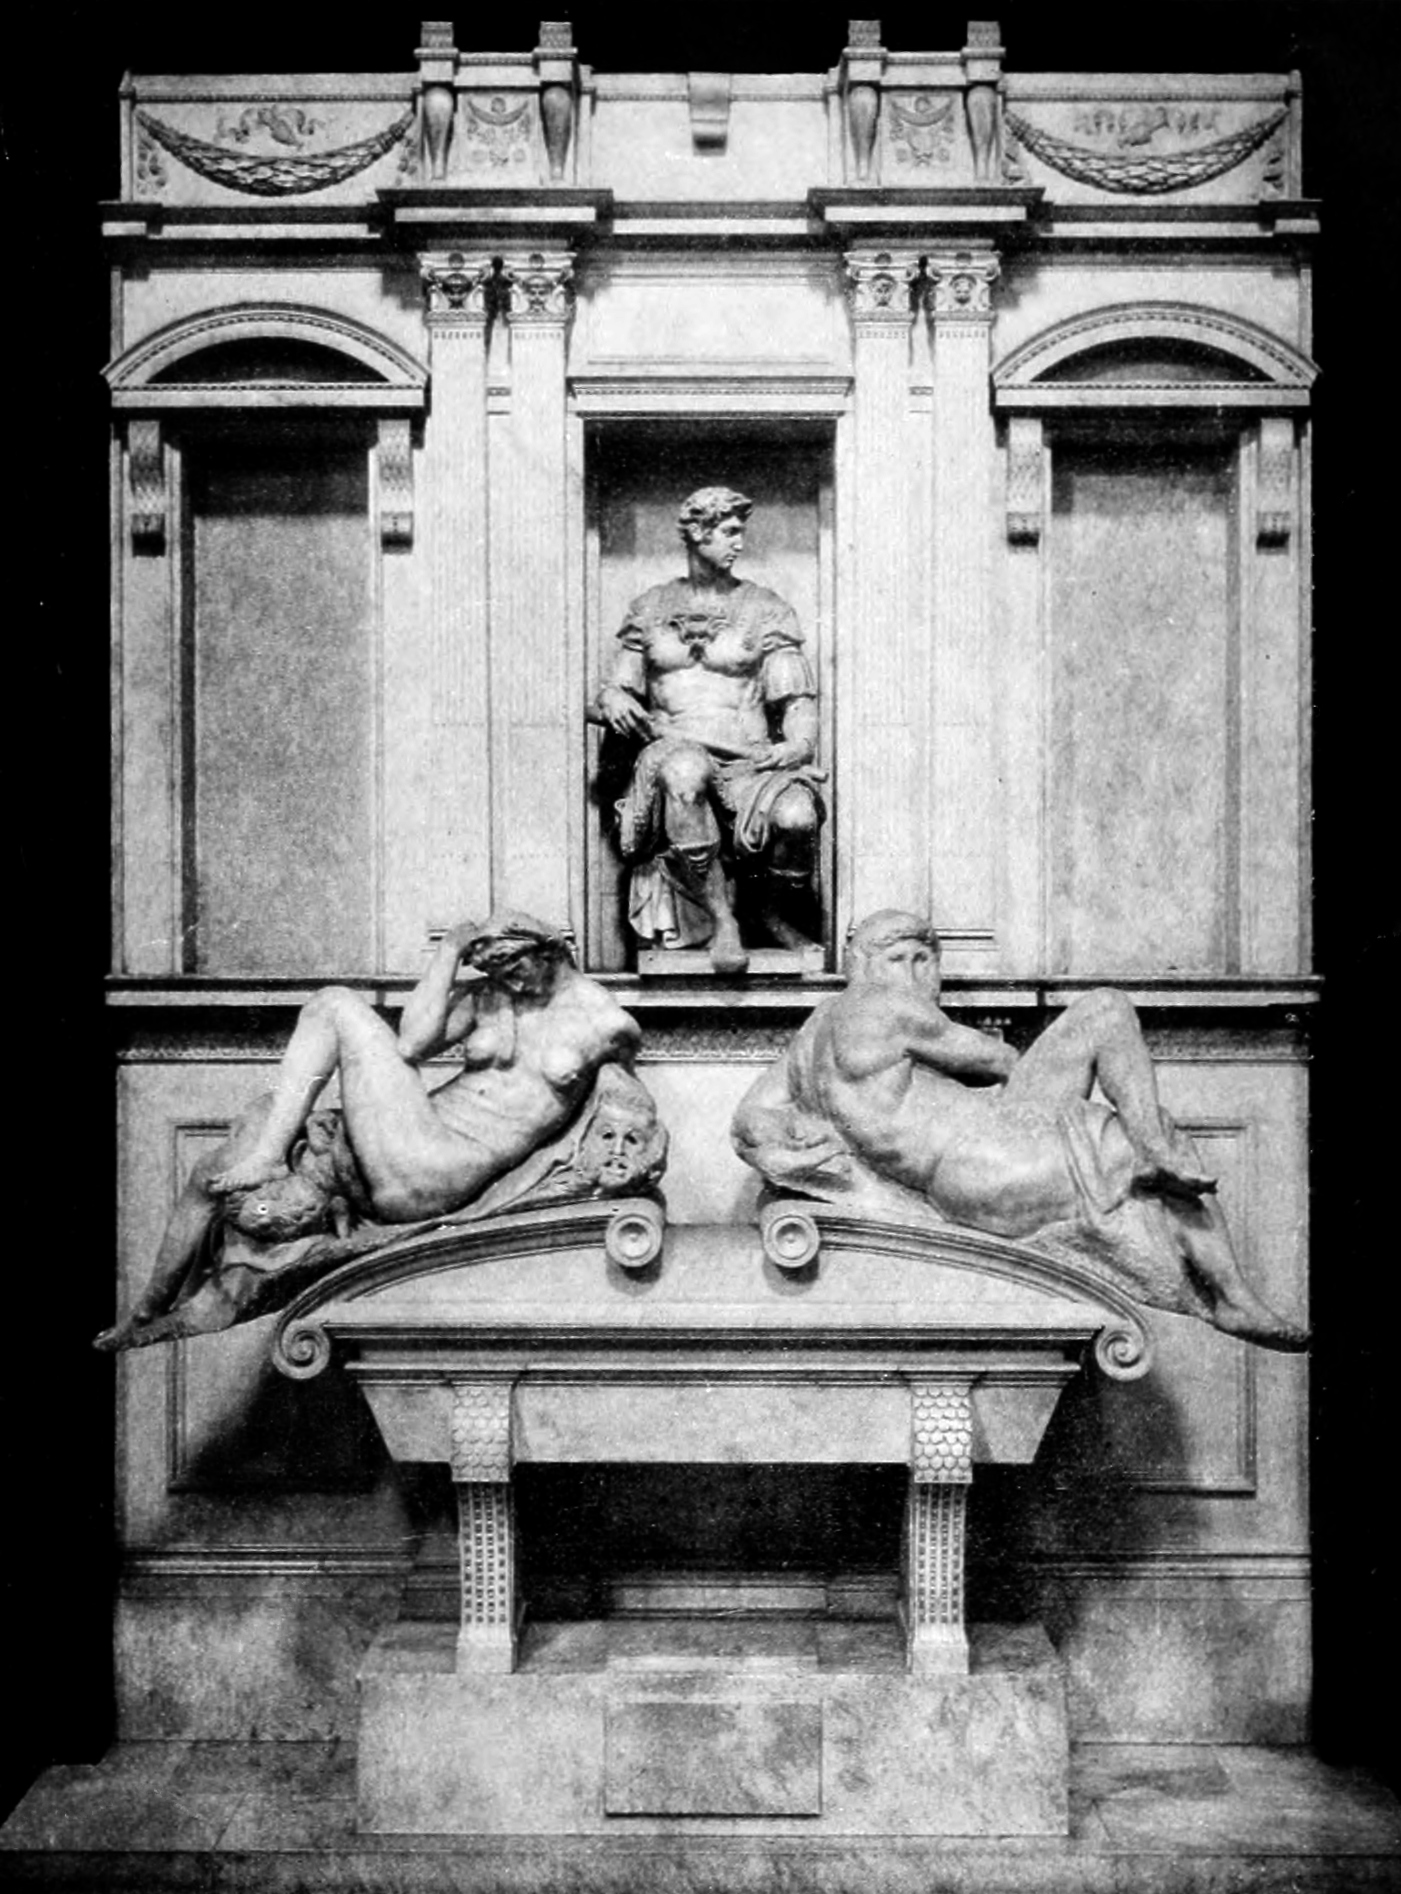 Michelangelo, Tomb of Giuliano di Lorenzo de' Medici with Night and Day, 1533, Florence, Italy